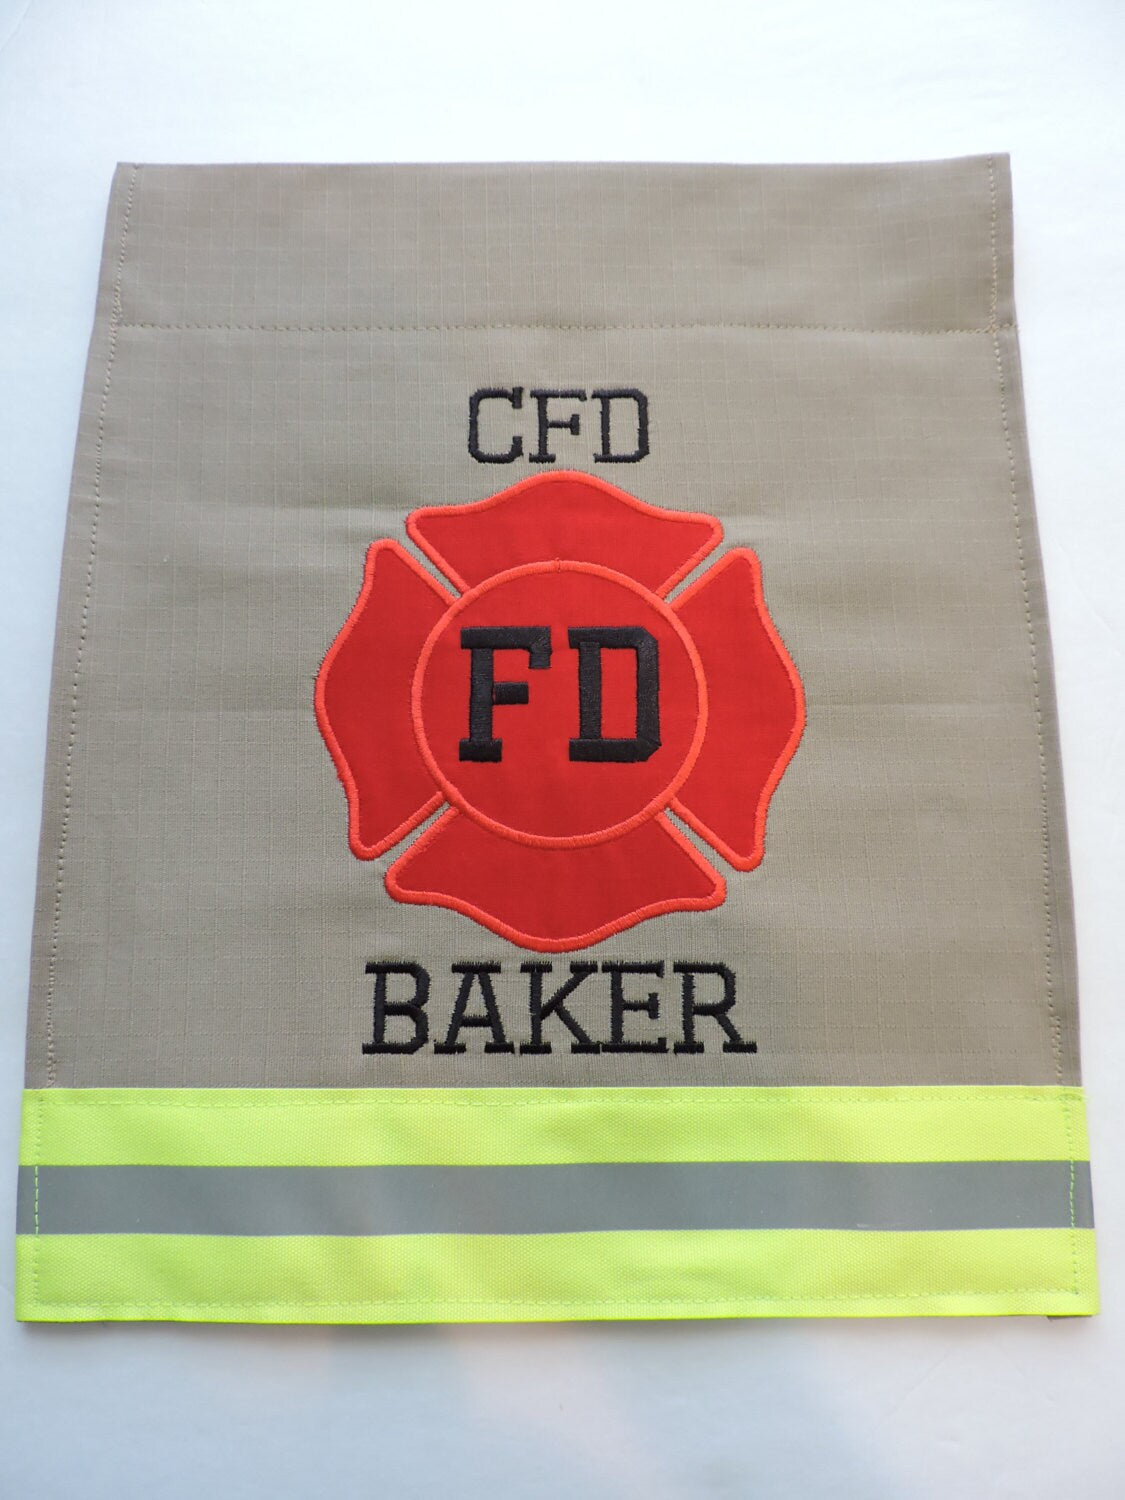 Tan Fabric Neon Yellow Reflective Tape firefighter fd garden flag with two names